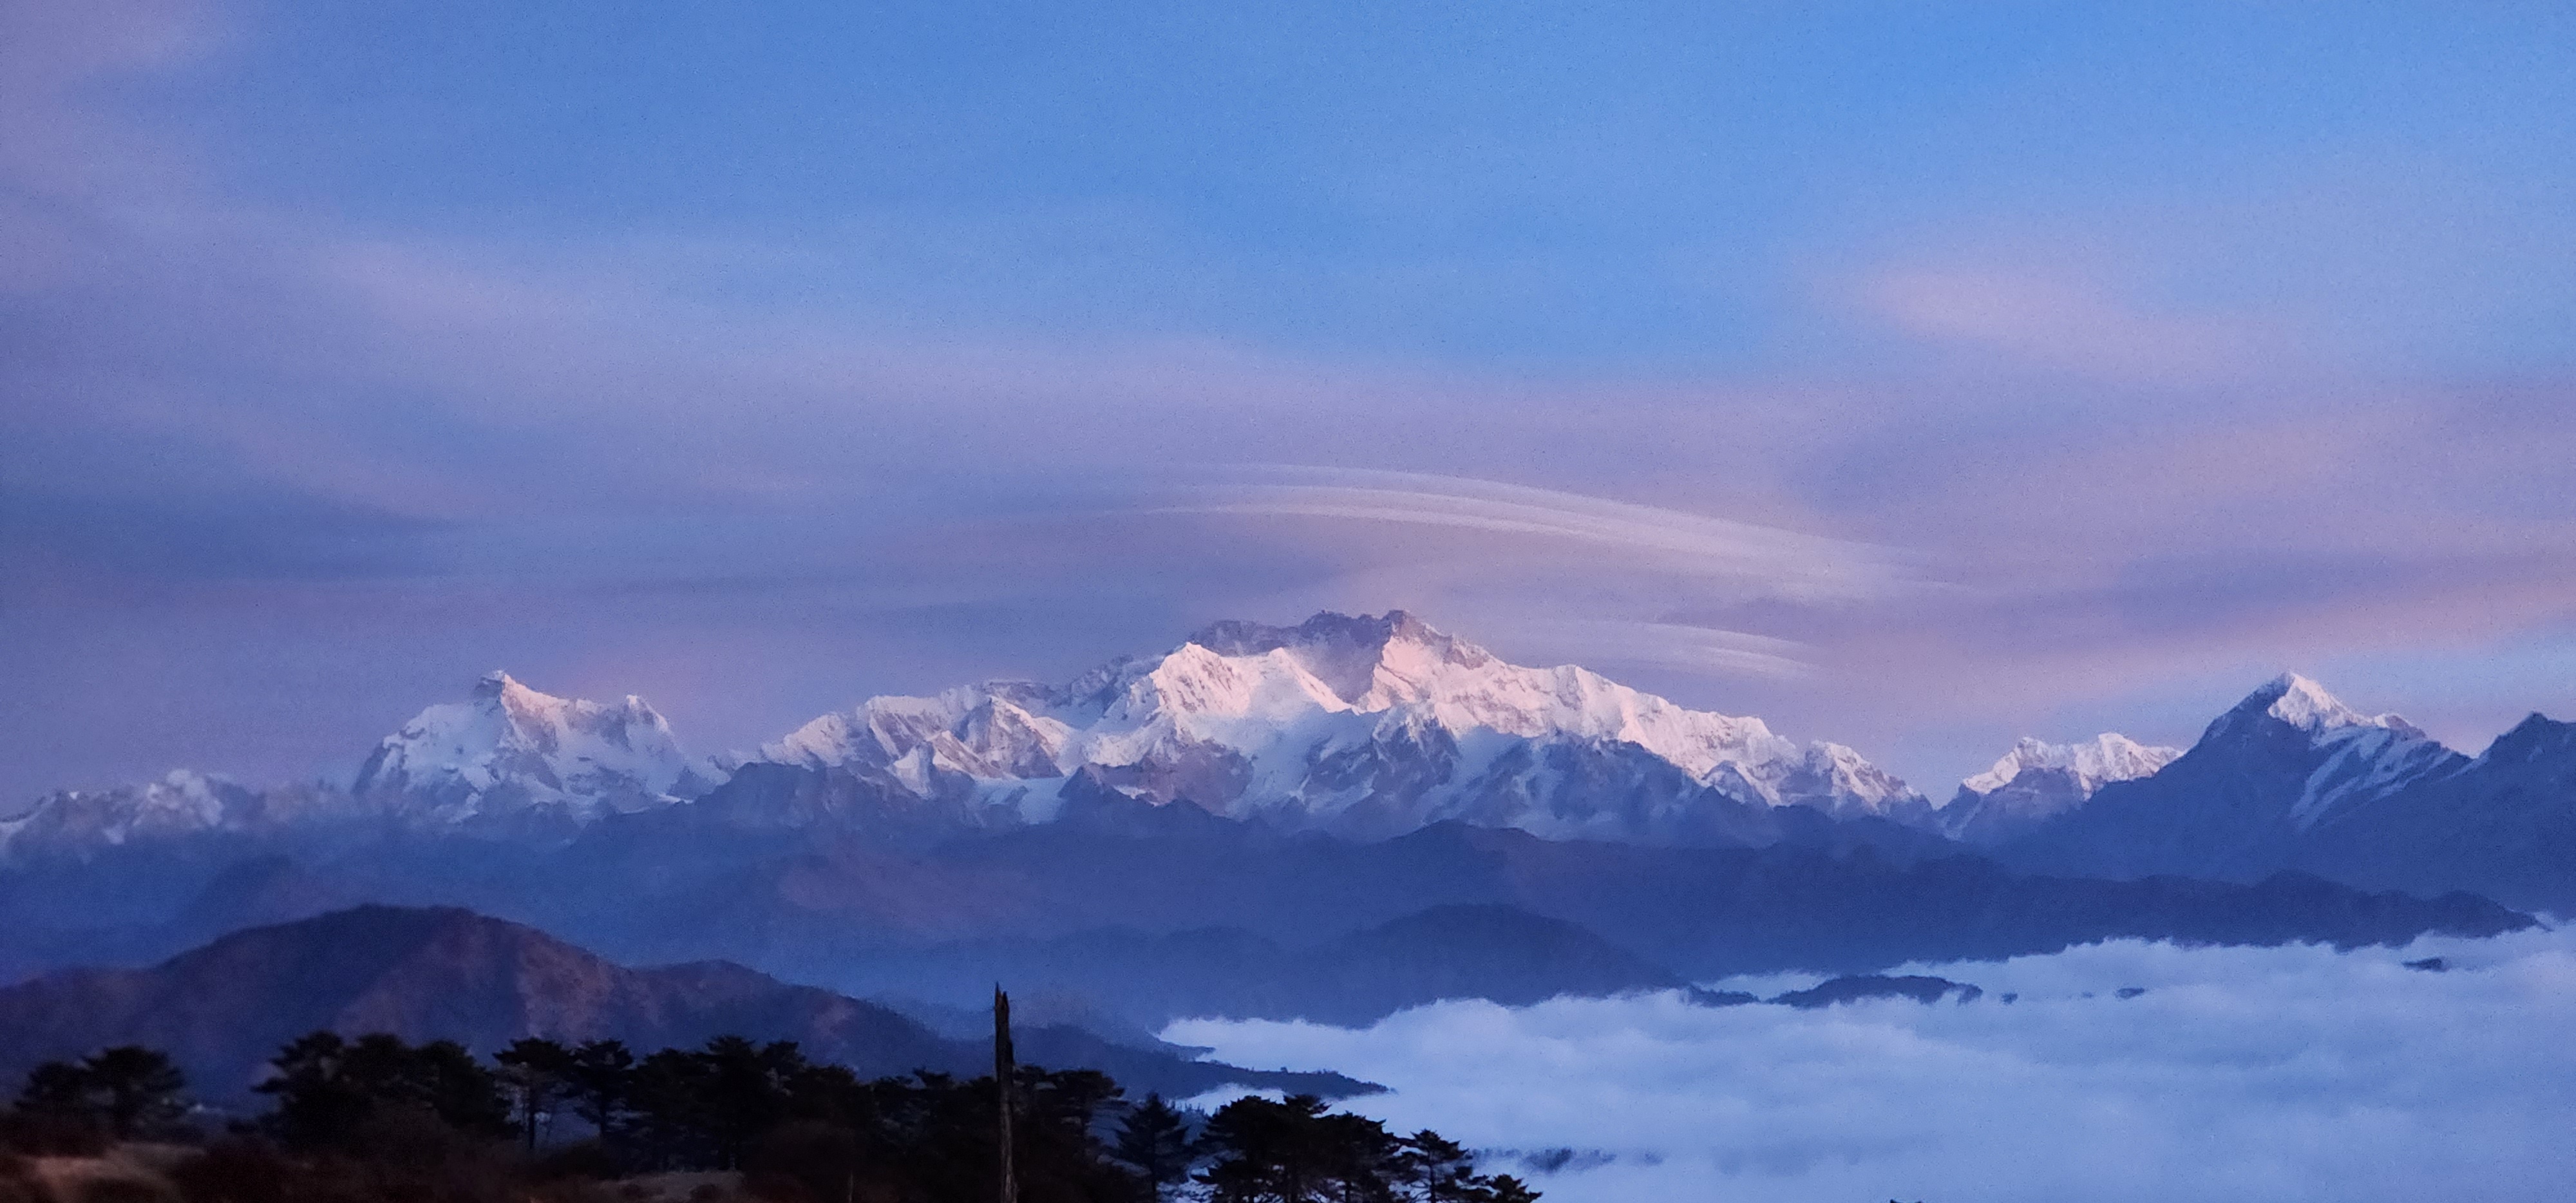 The Sleeping Buddha With Kanchenjunga at the center 